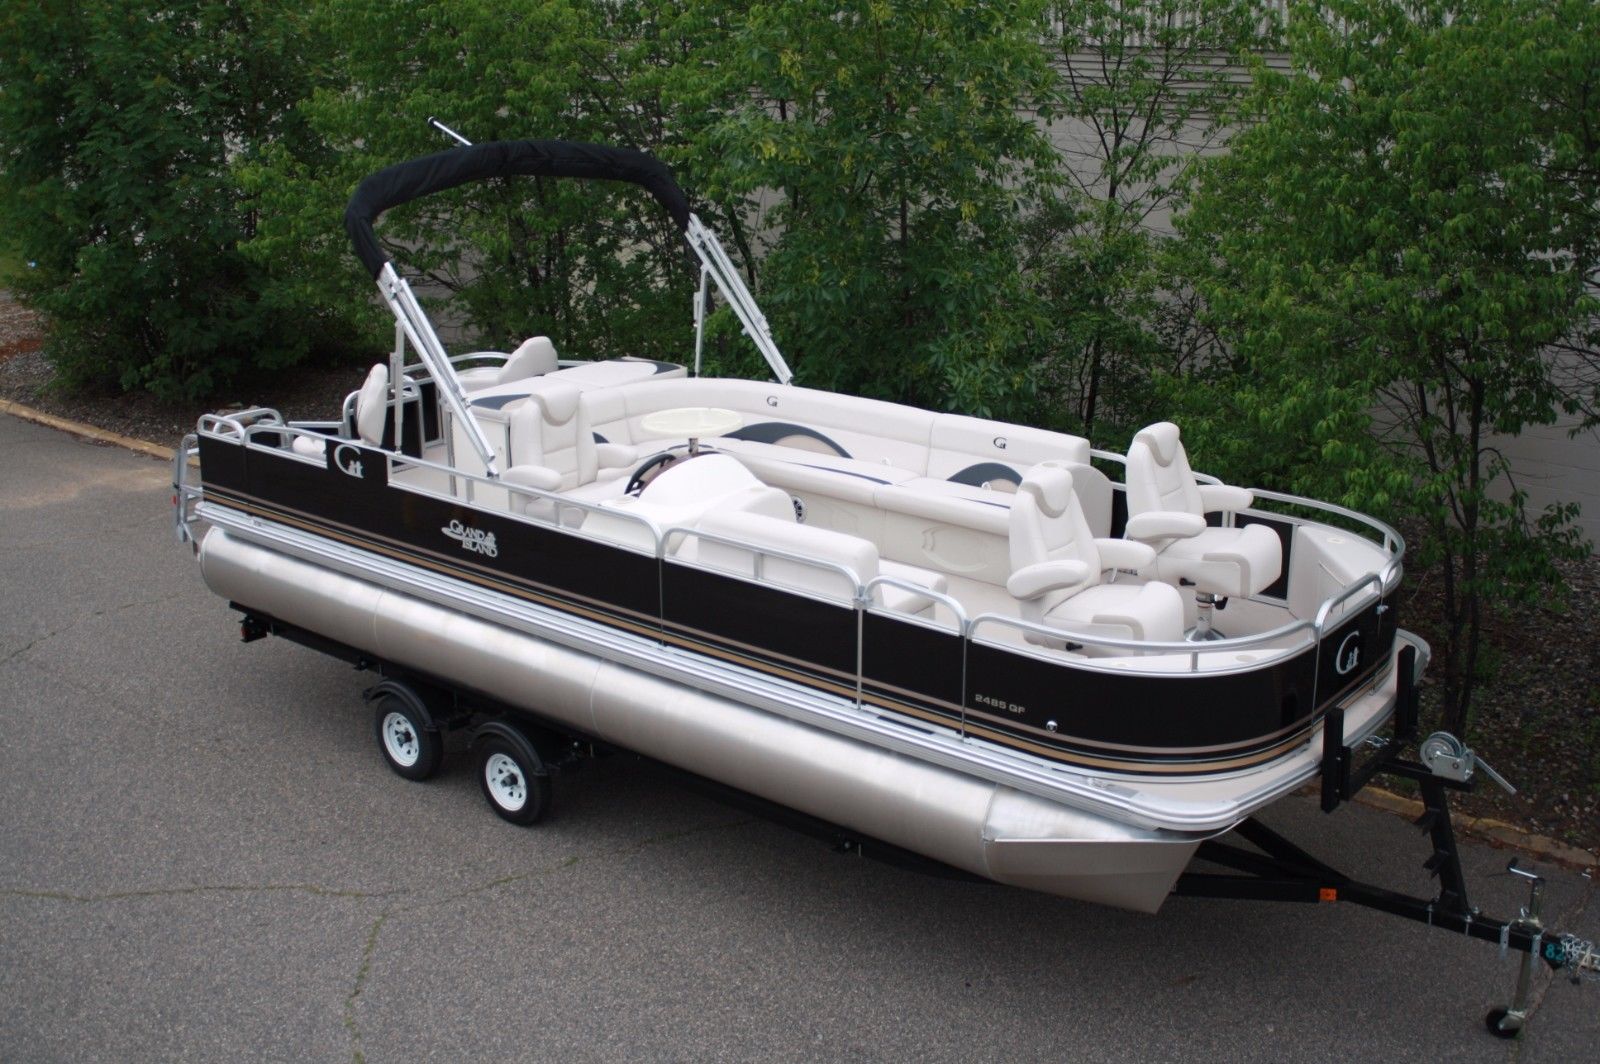 Tahoe 24 FNFRE RC 2016 for sale for $23,999 - Boats-from ...